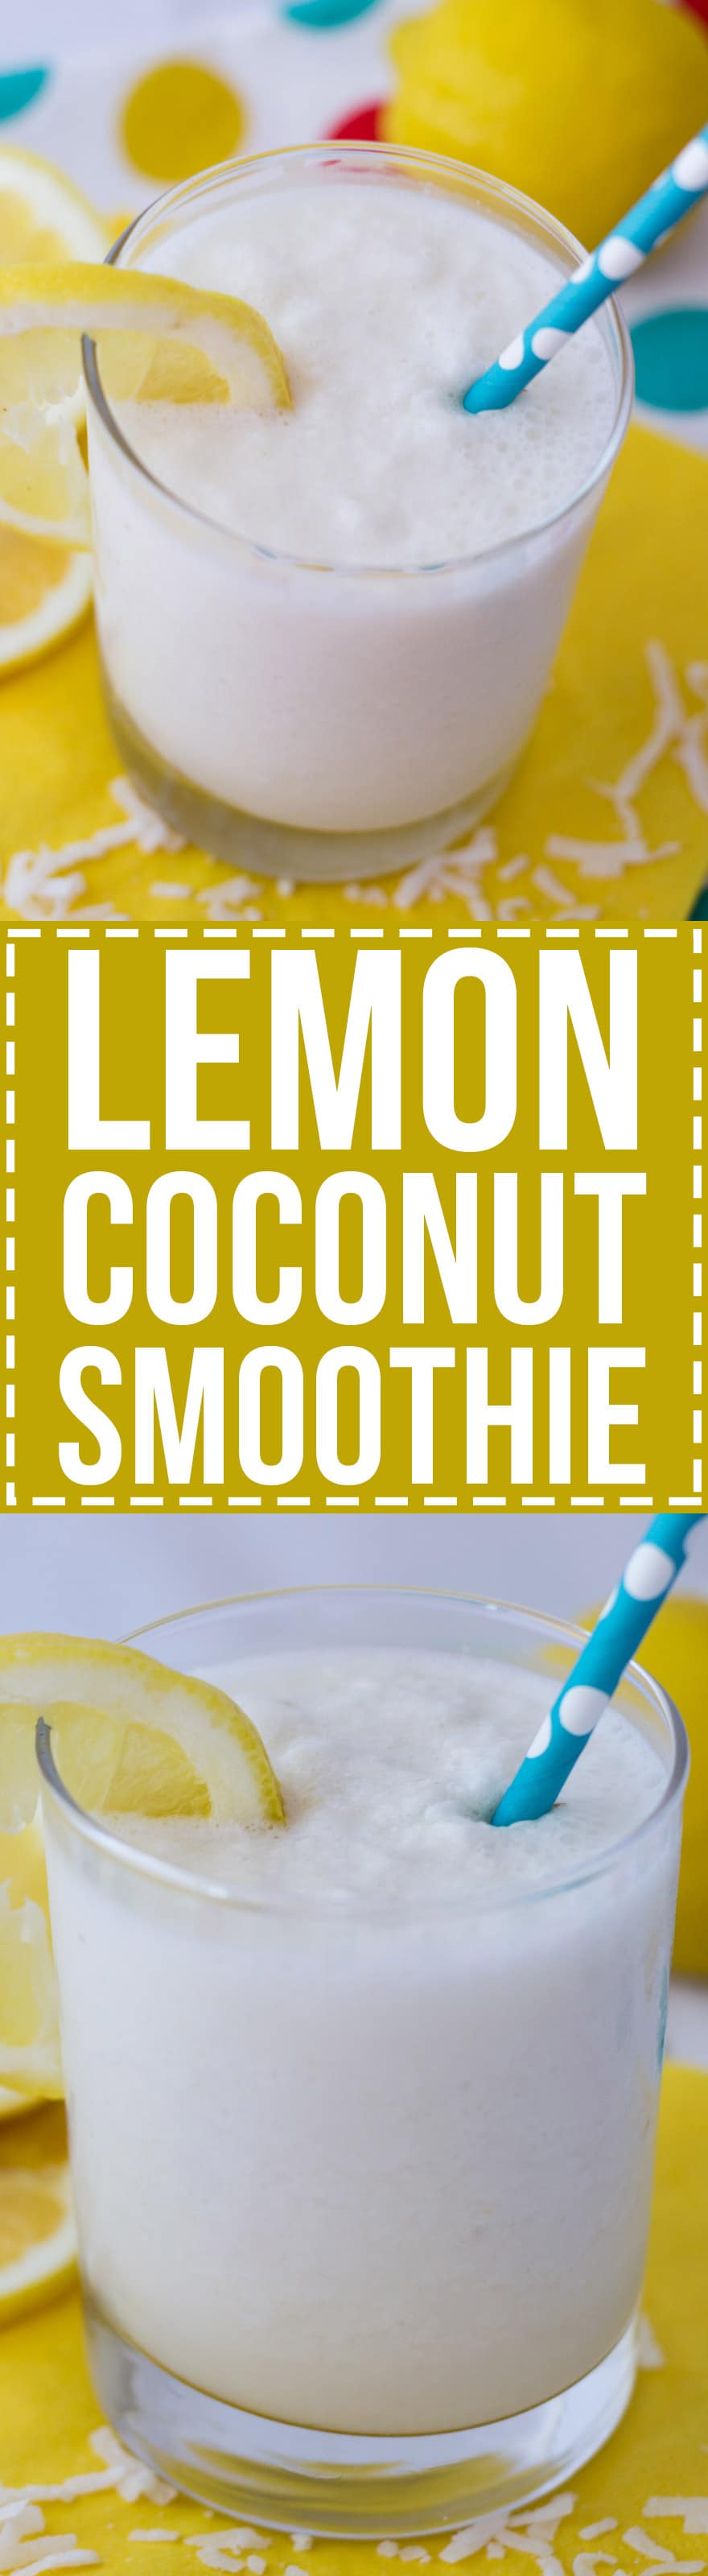 This tart and refreshing Lemon Coconut Smoothie really hits the spot in spring and summer! It's a light, low cal drink that you don't have to feel guilty about.